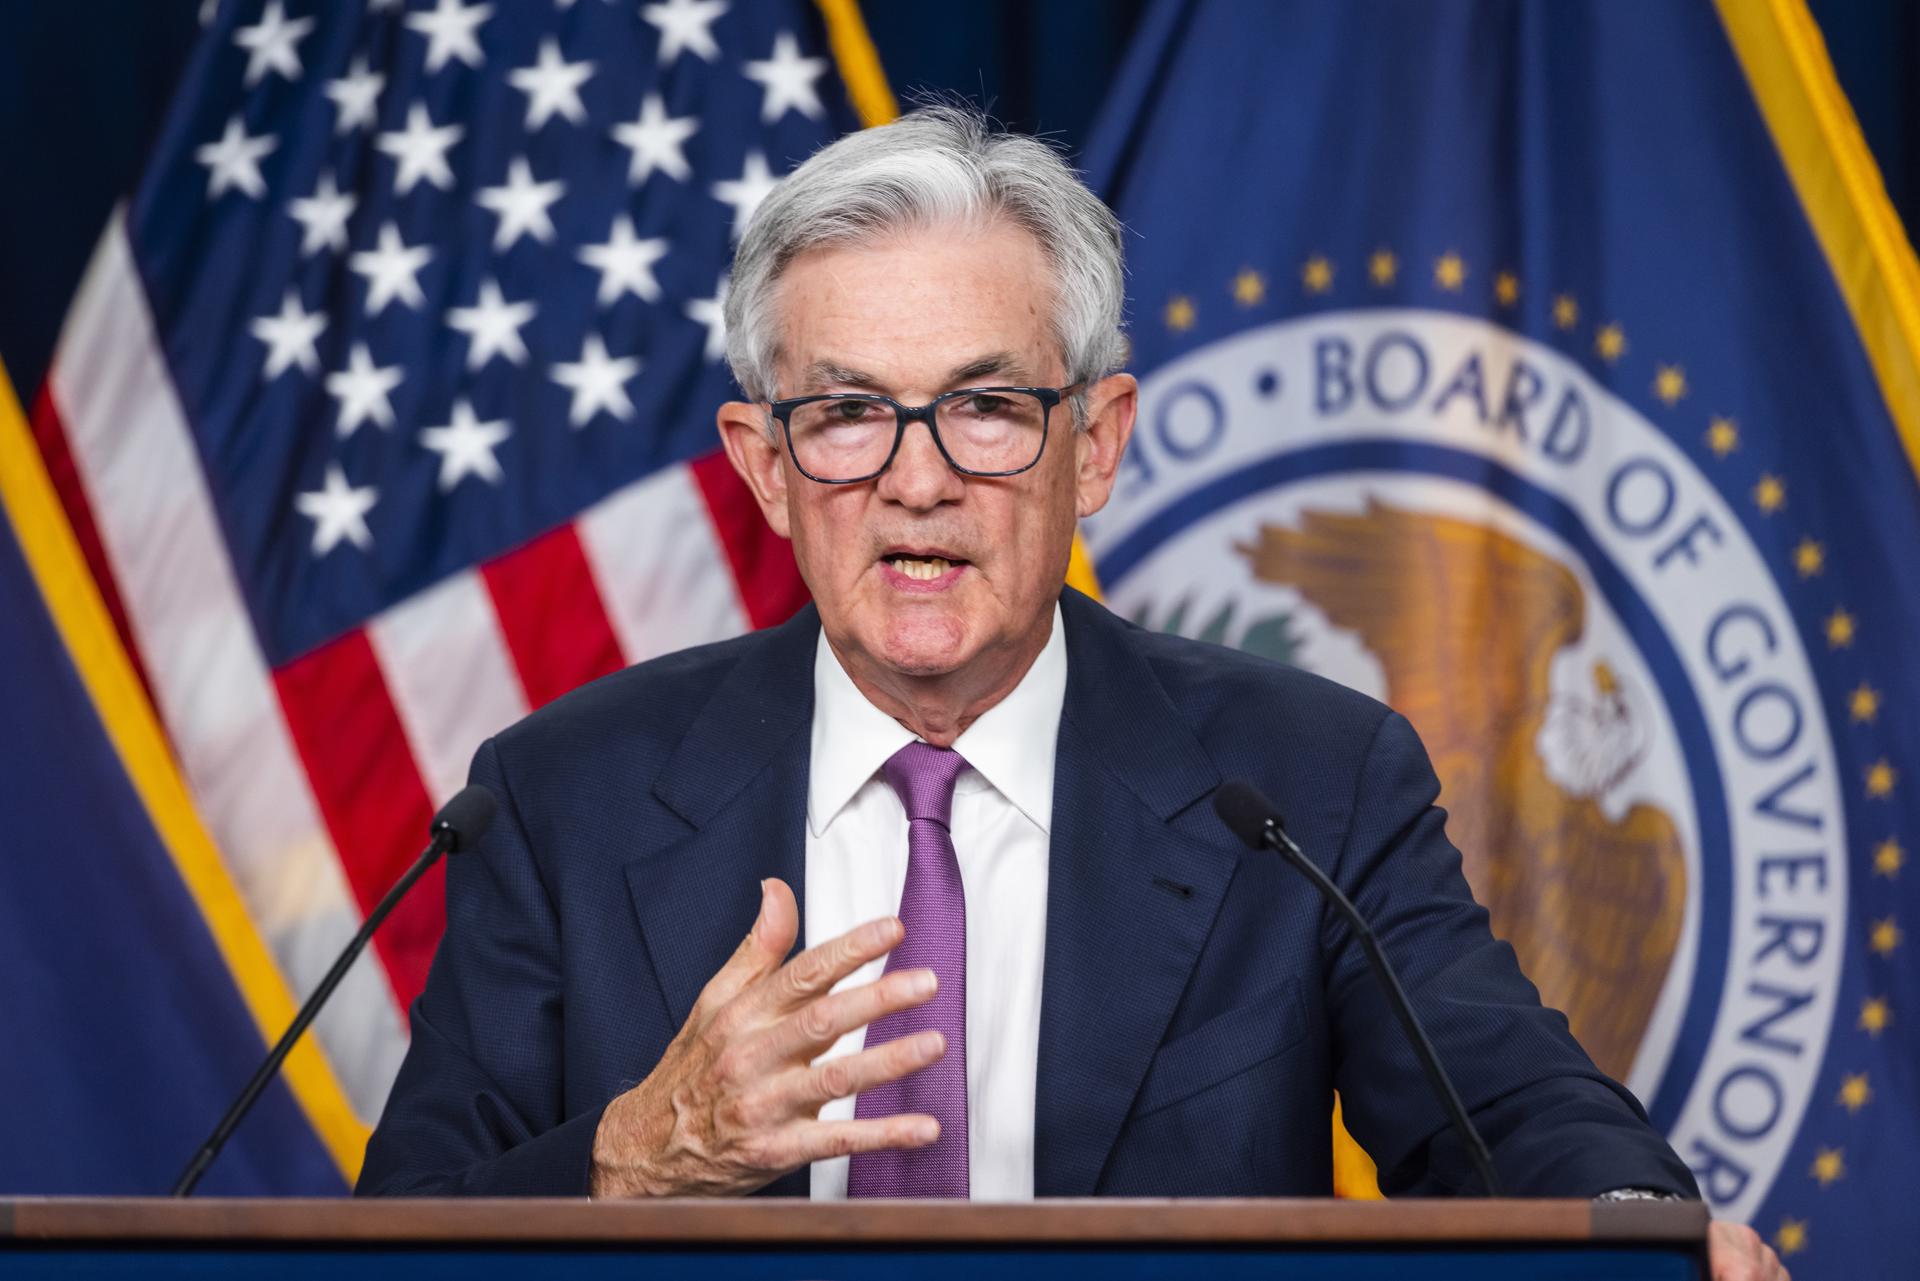 The chairman of the United States Federal Reserve, Jerome Powell, gives a press conference on 14 June 2023 in Washington DC following the latest two-day meeting of the Federal Open Market Committee, the Fed's monetary policy-making body. EFE/Jim Lo Scalzo